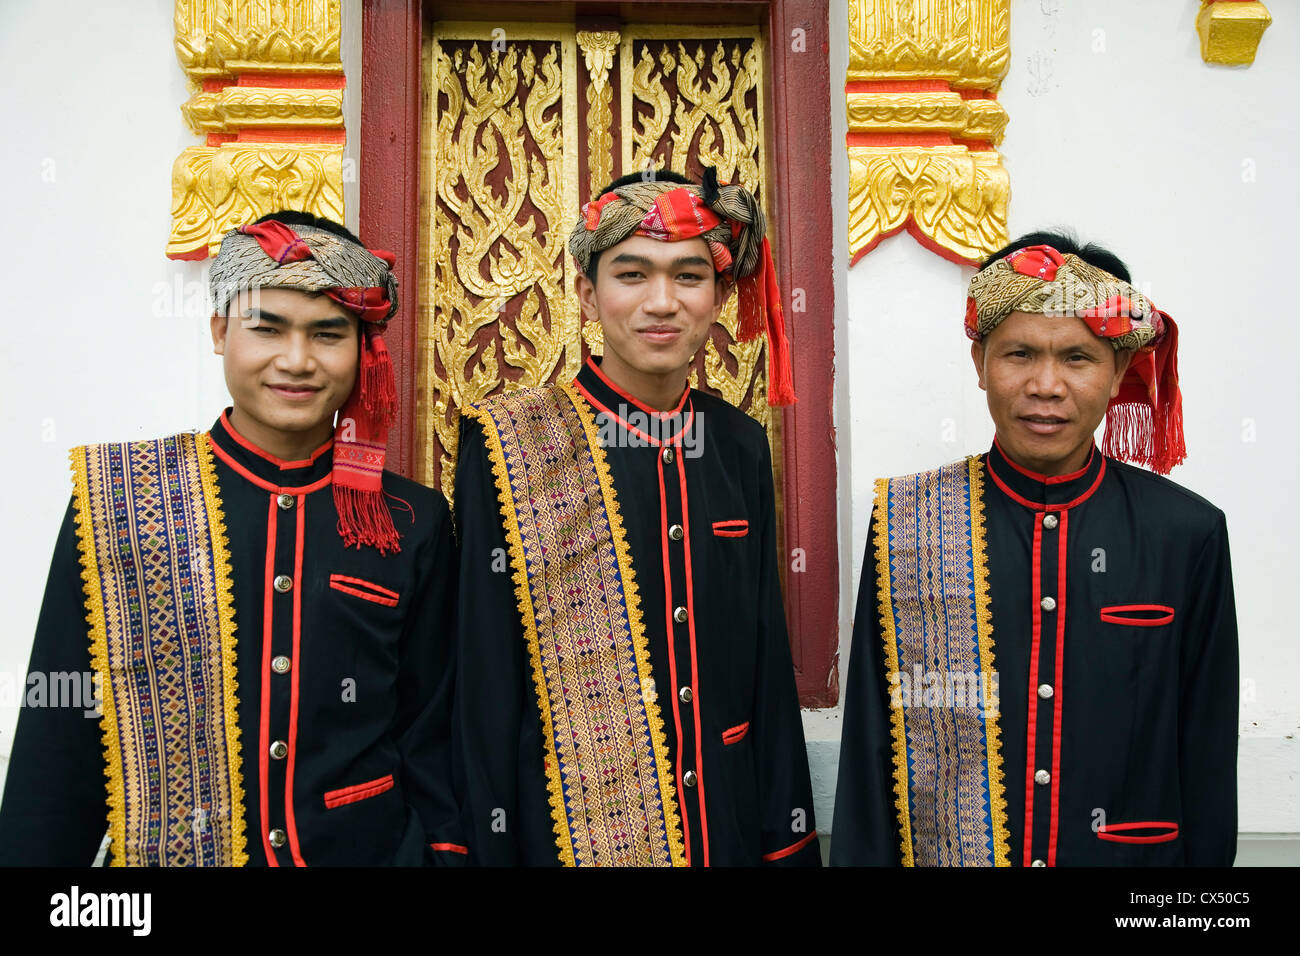 Men in traditional Isan dress during the Wax Castle festival. Sakhon ...